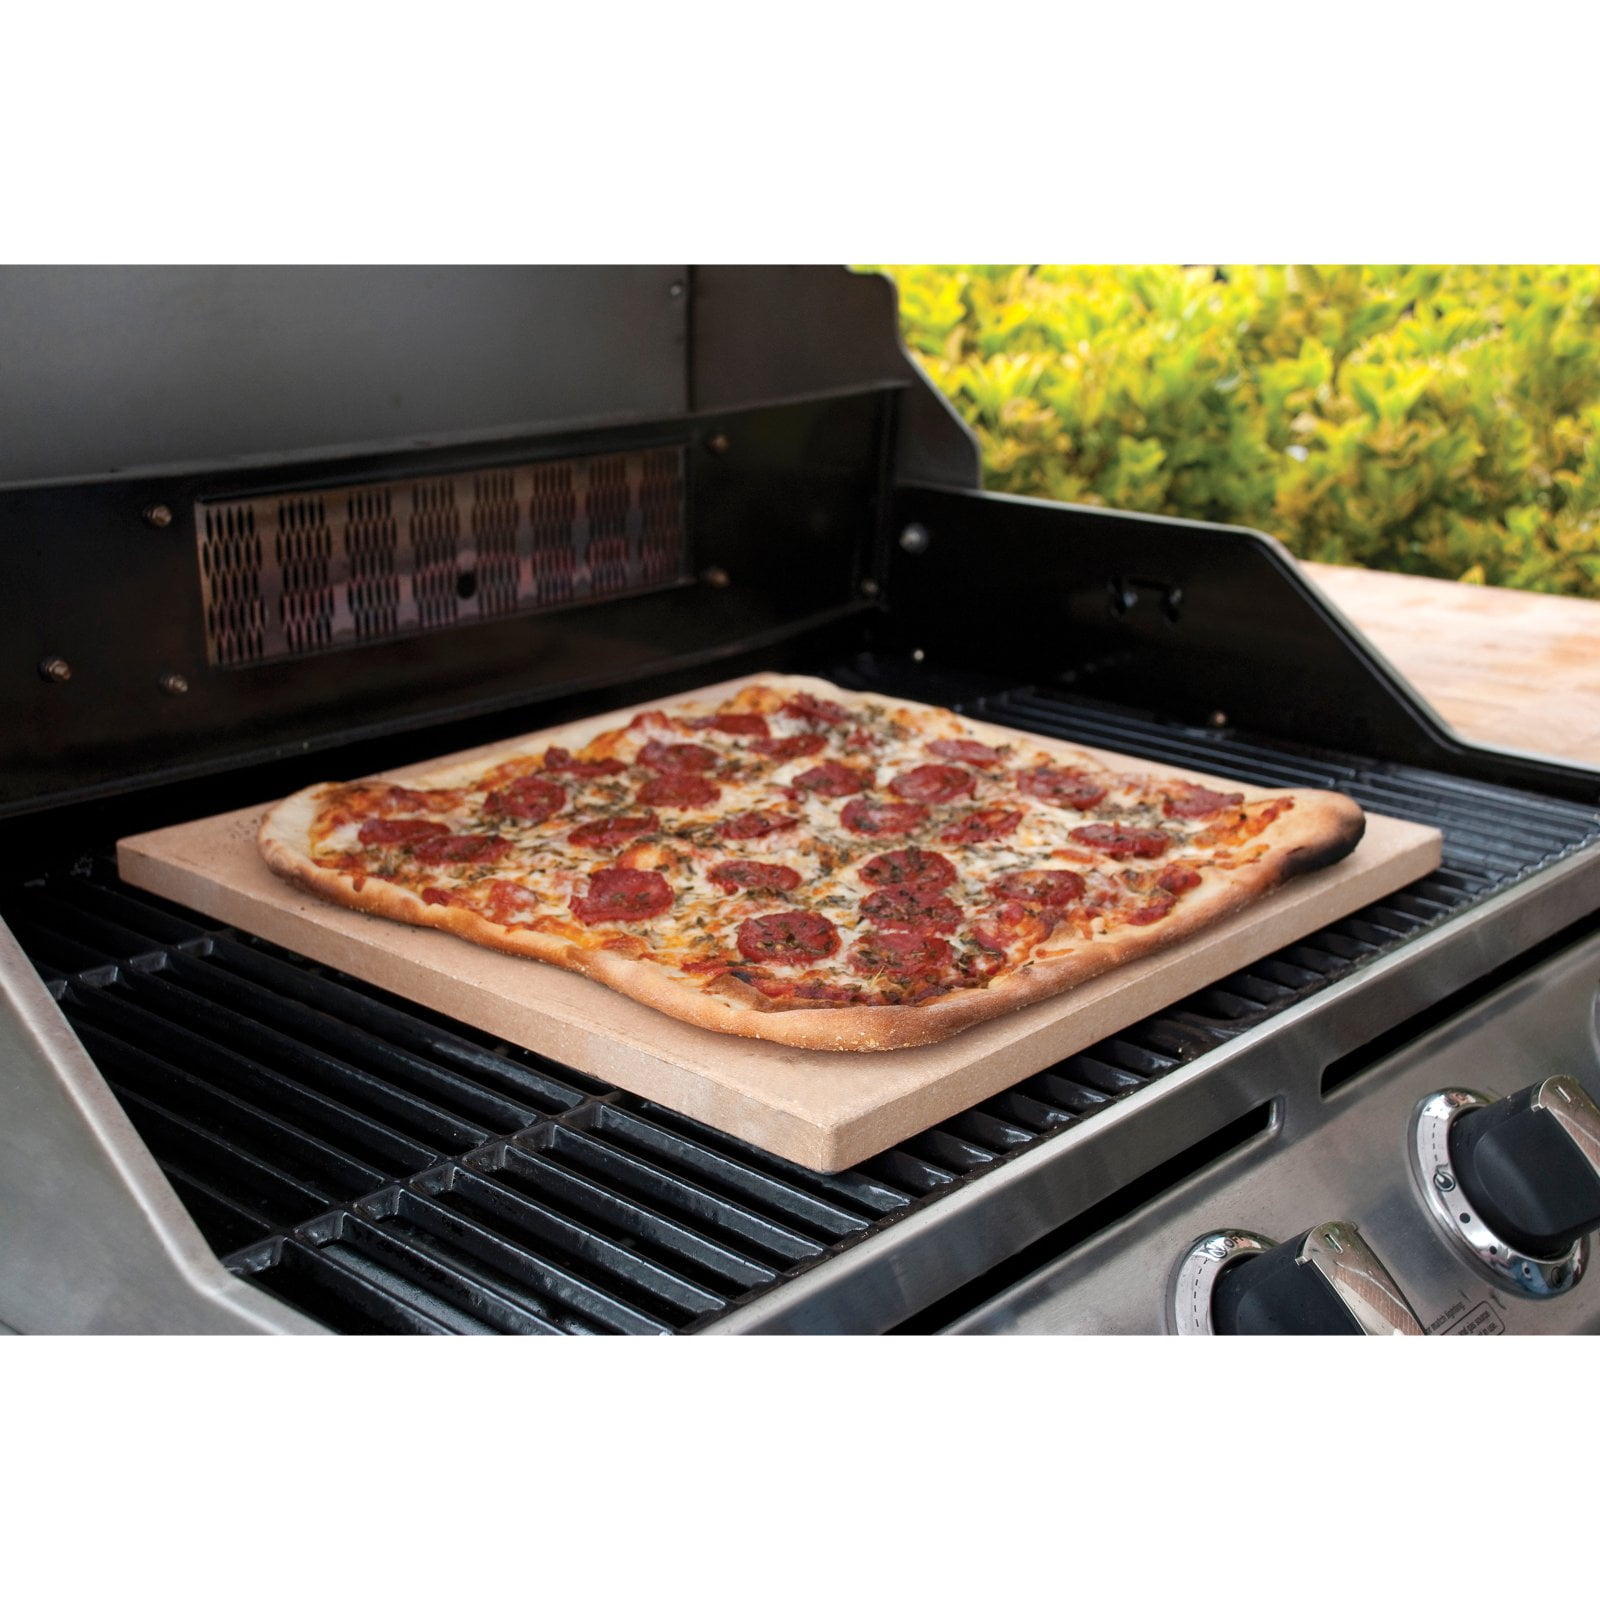 15" Pizza Grilling Stone Rectangular Baking Tools For BBQ and Grill Oven Durable 